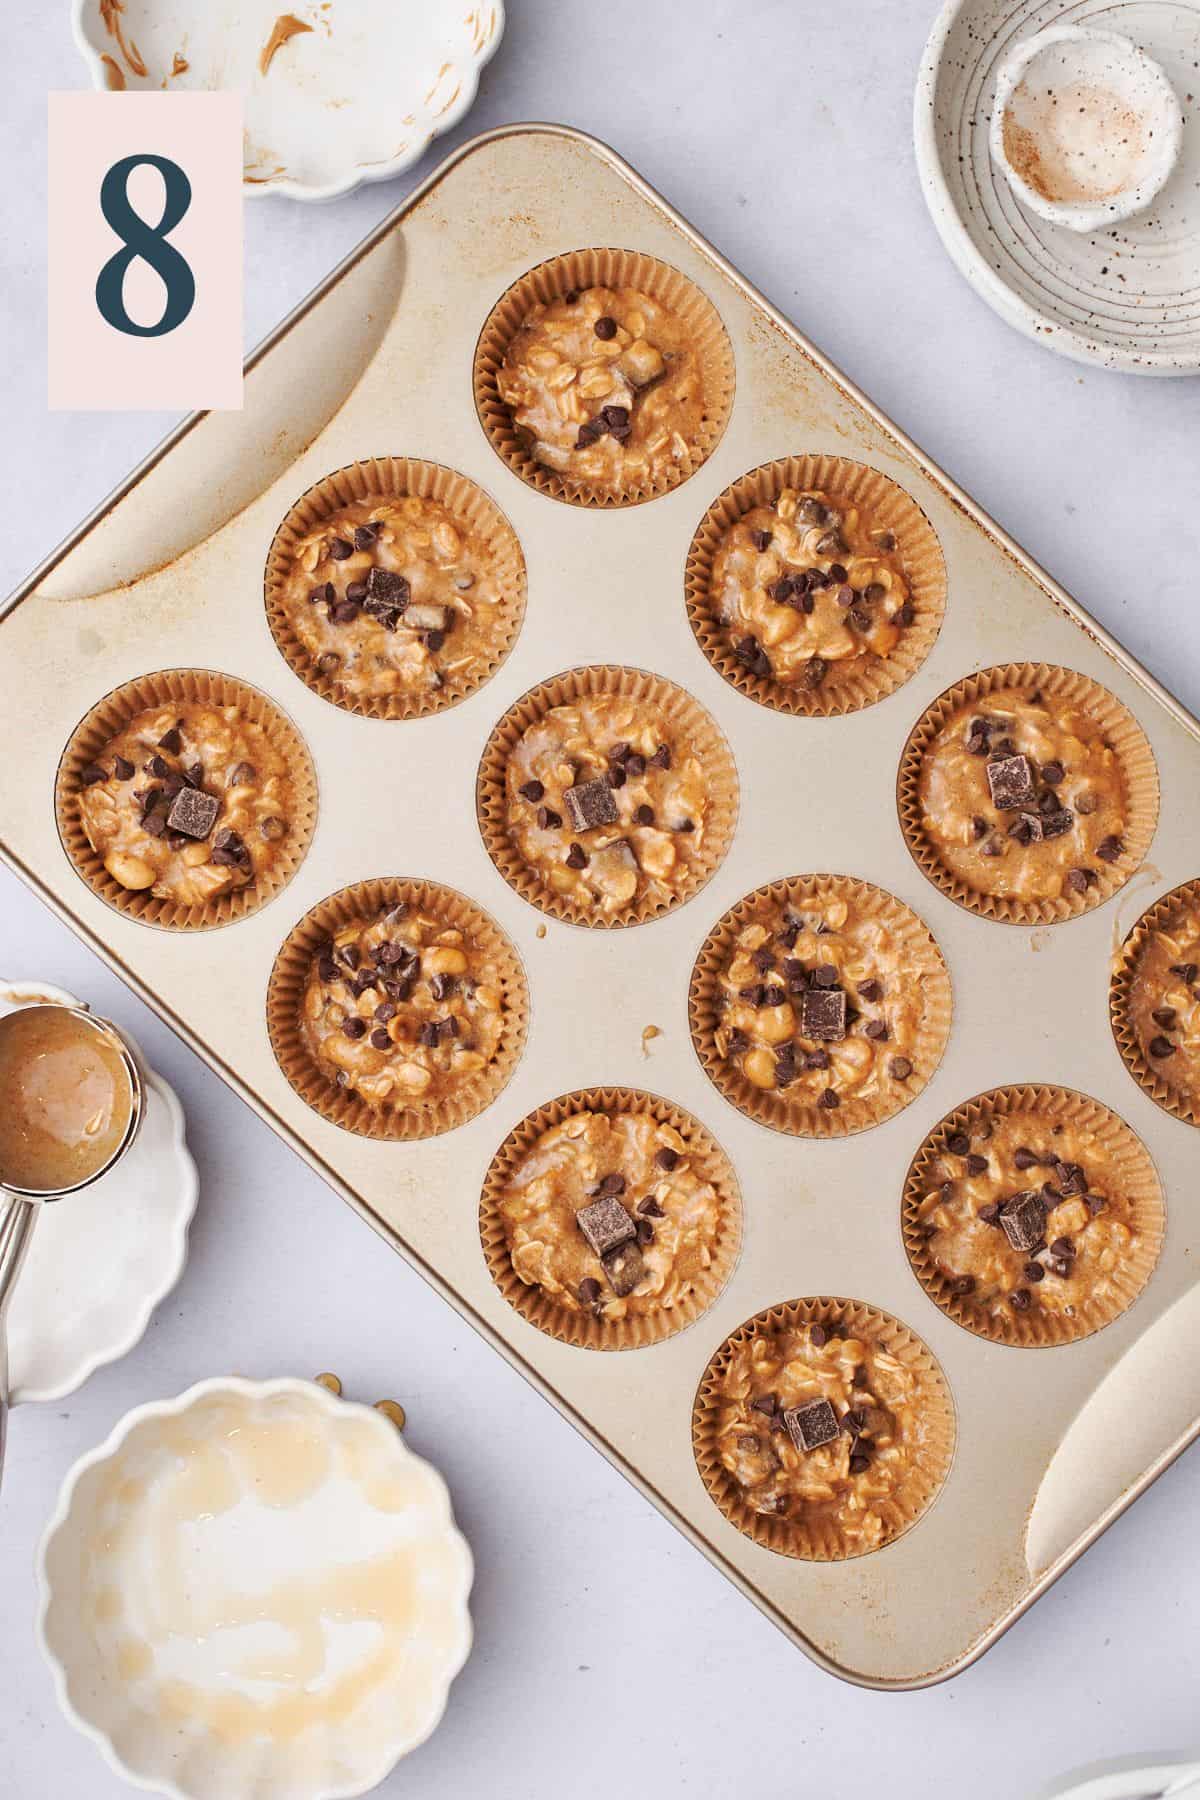 Oatmeal cup mixture transferred to muffin tin inside of muffin liners.